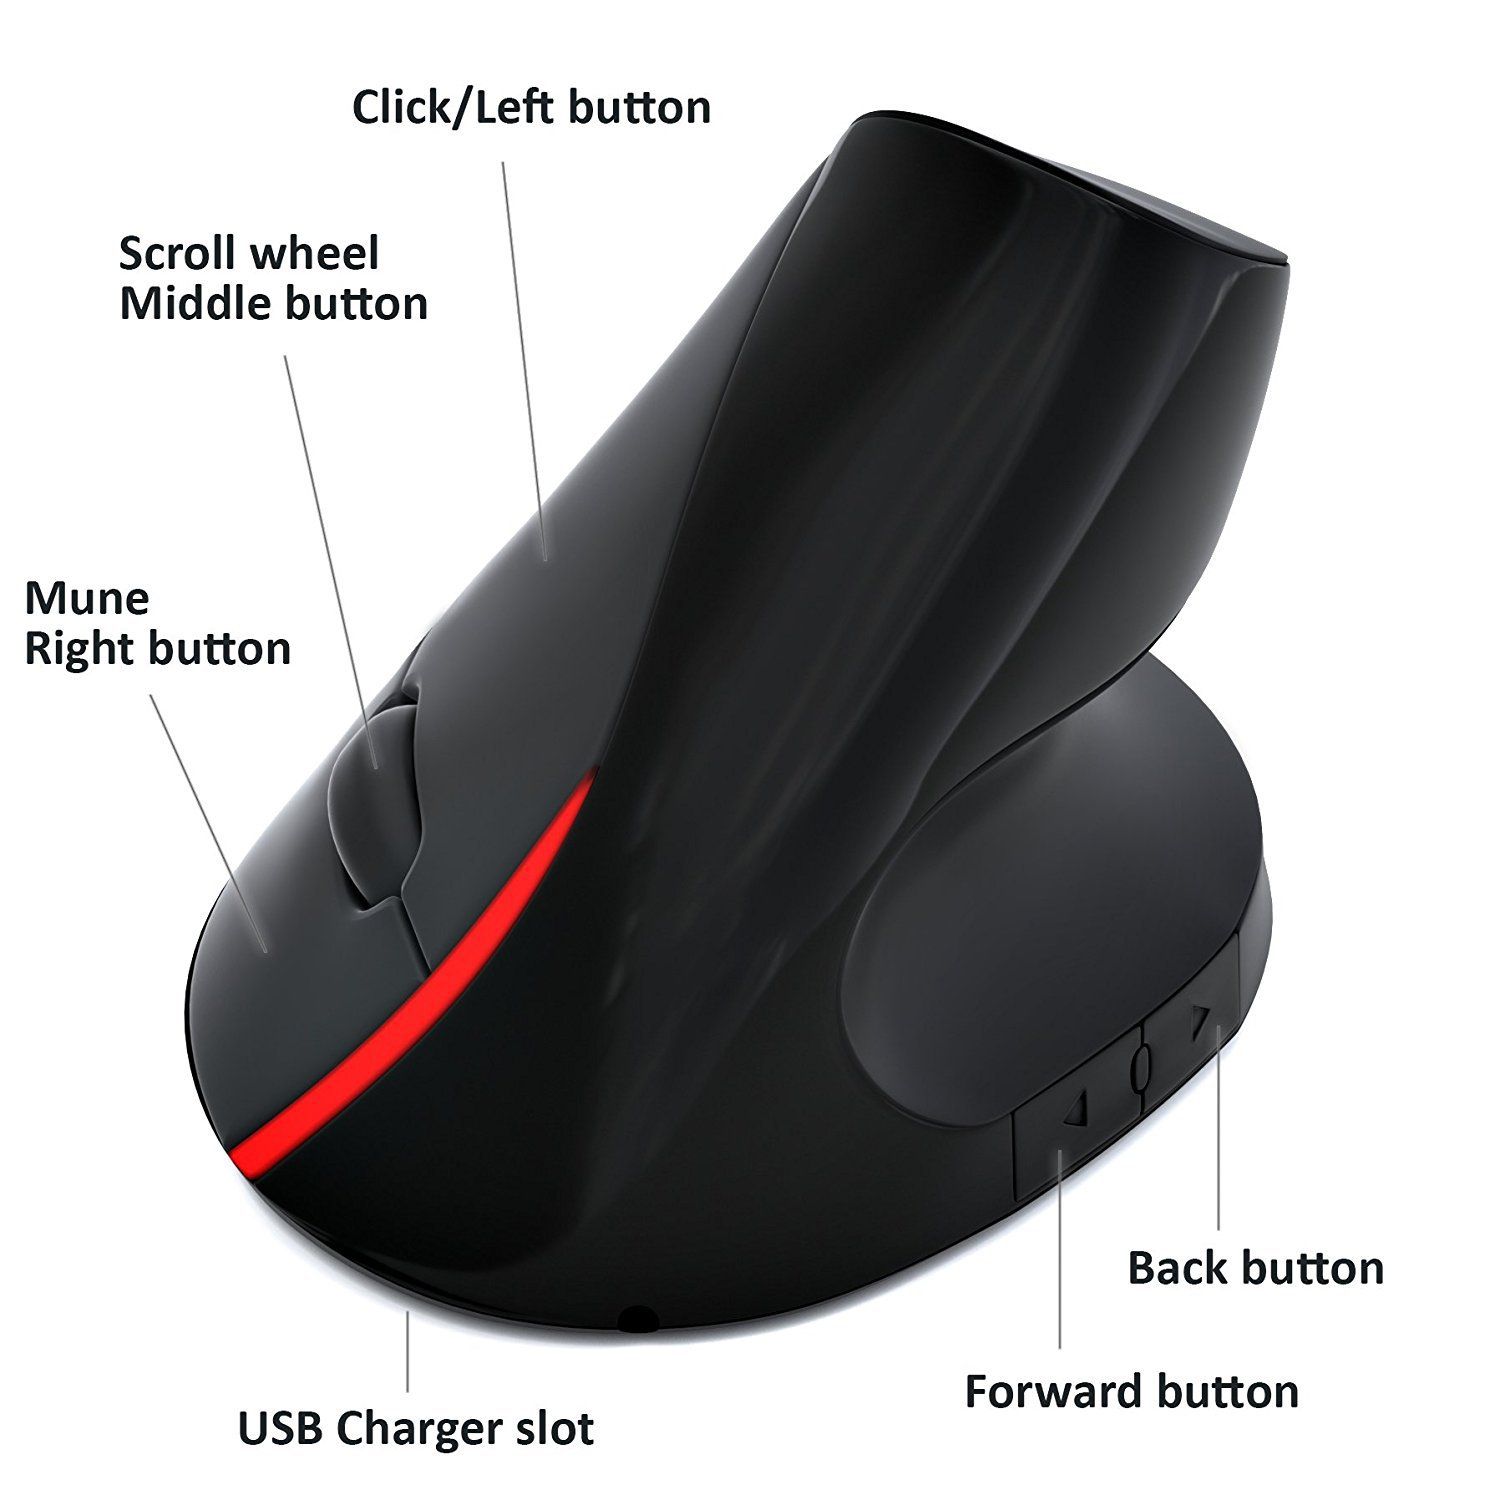 HXSJ-A889-24GHz-Wireless-Rechargeable-Vertical-Gaming-Mouse-Ergonomic-Design-2400DPI-Mice-1395978